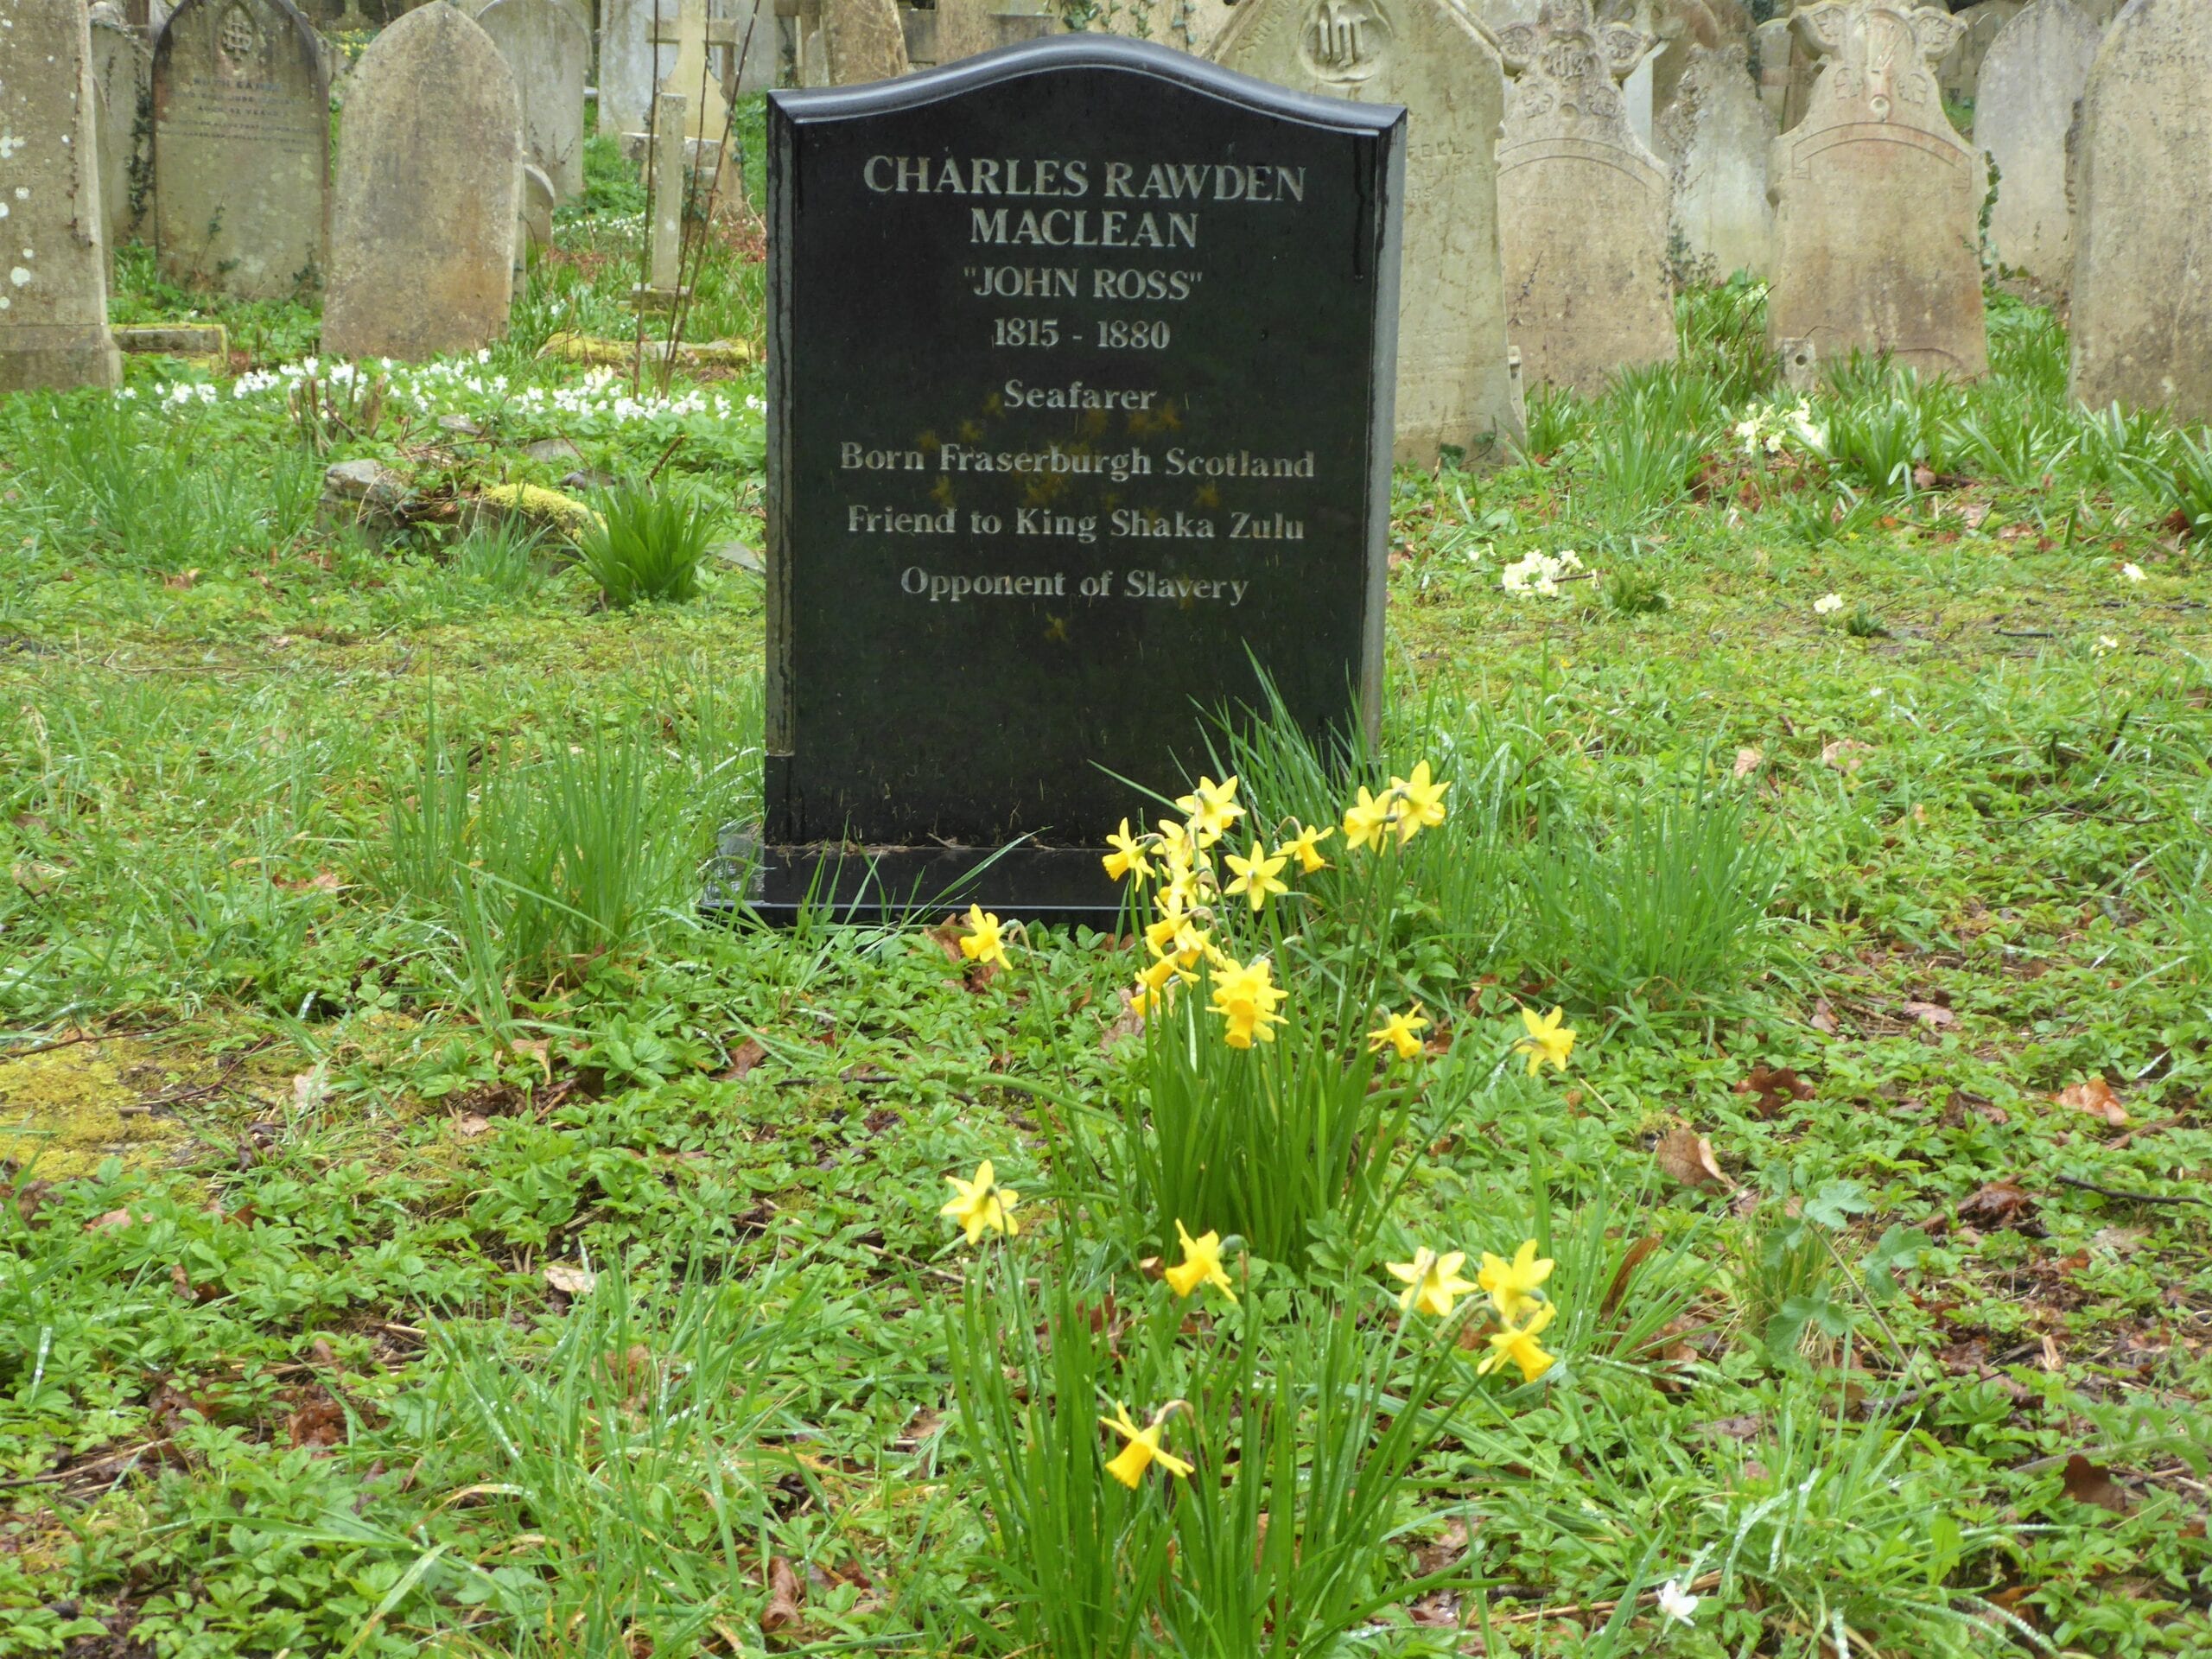 A grave in Southampton cemetery for John Ross in memoriam of his anti-slave campaigns.